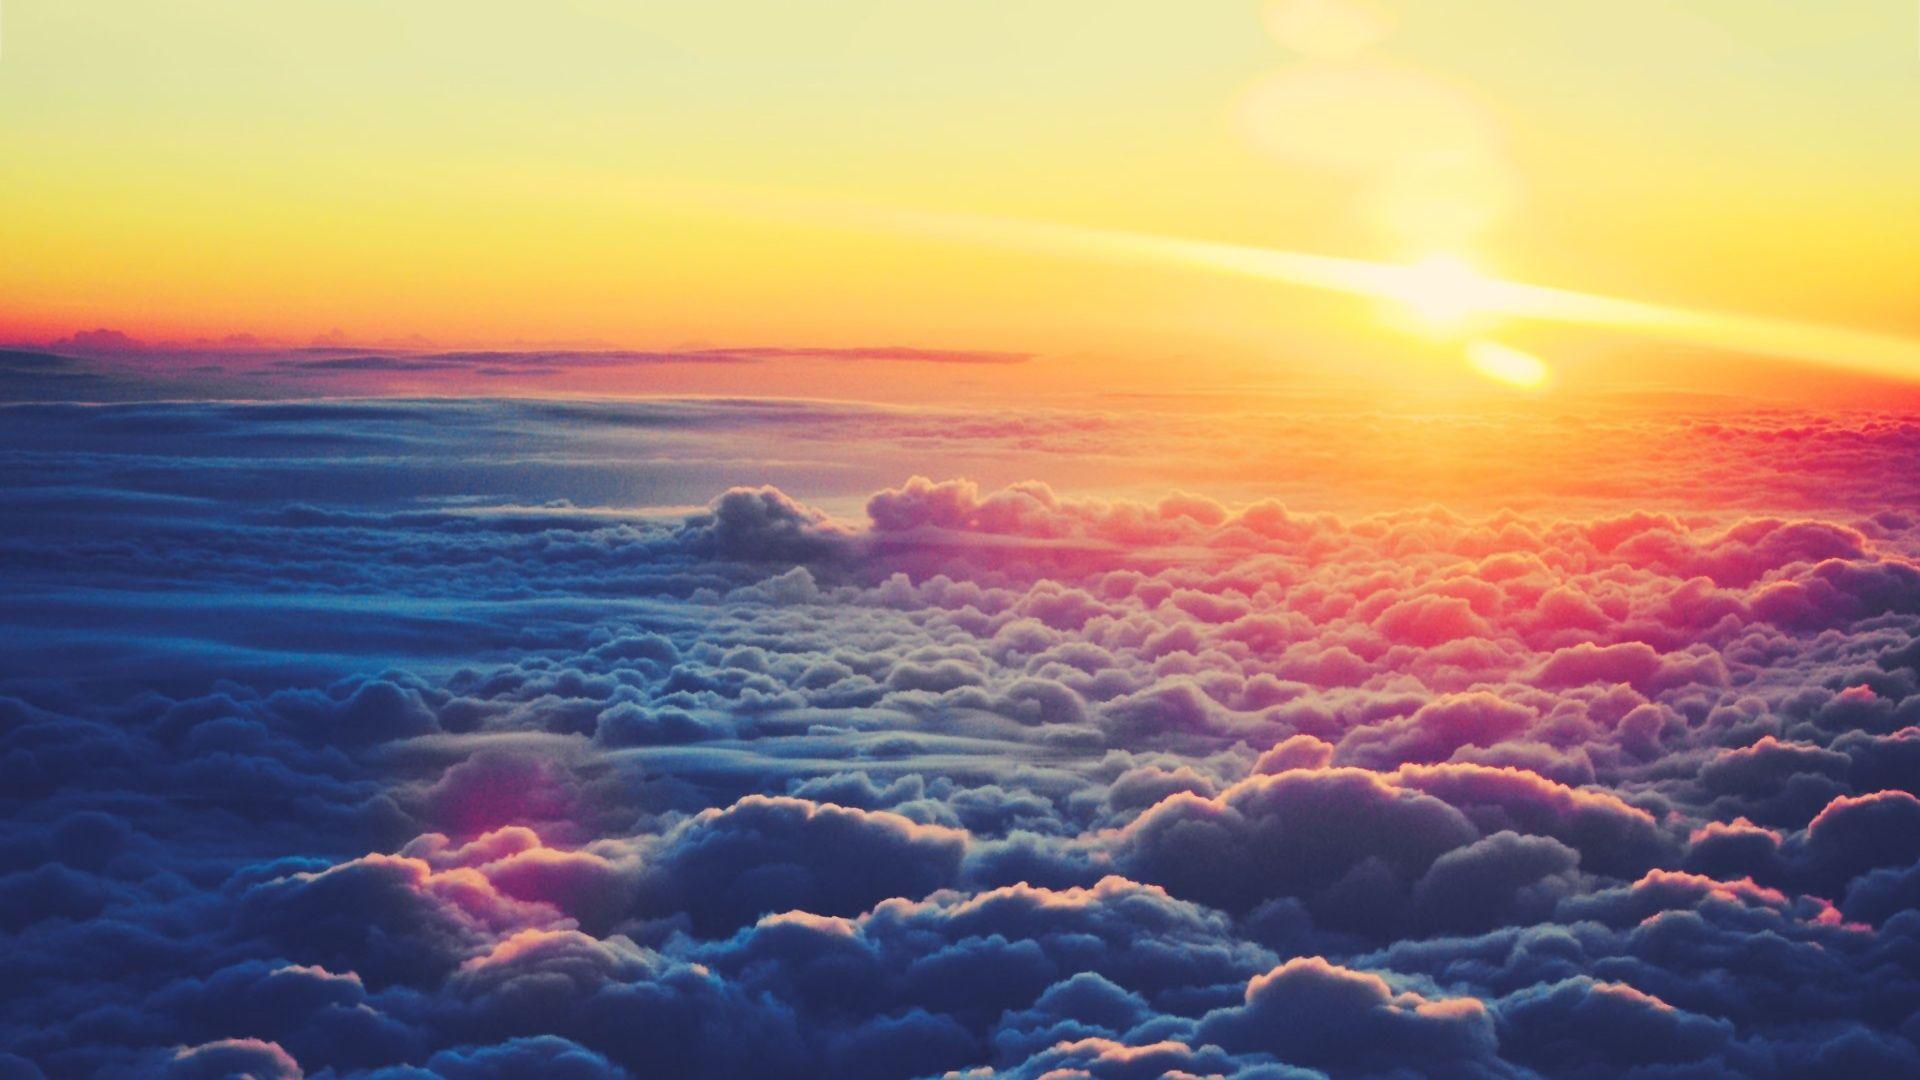 Sunset Over Clouds Wallpaper 1920x1080